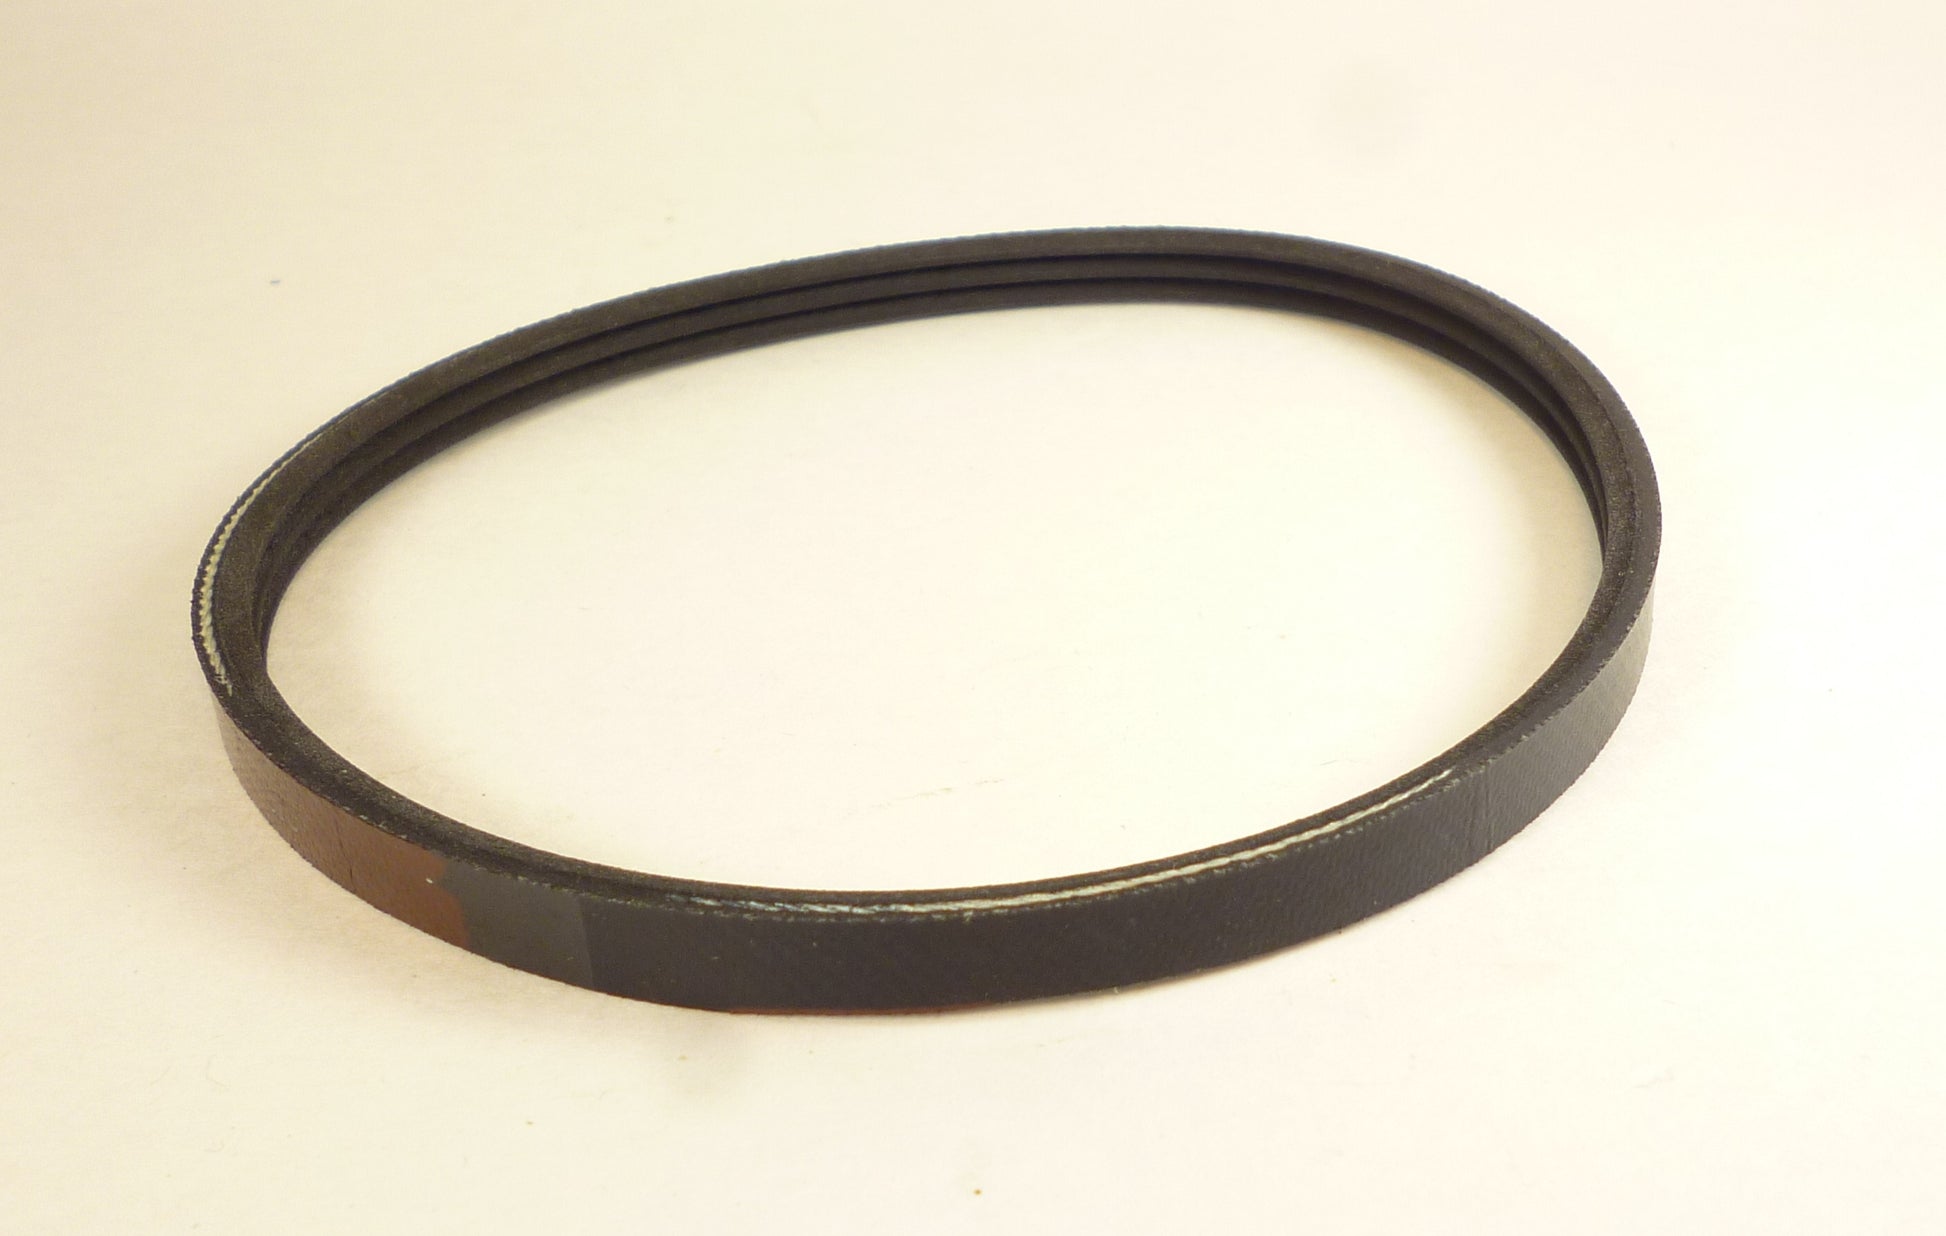 2 Replacement Ribbed Drive BELTS for DELTA 18-900L Type 1 Drill Press